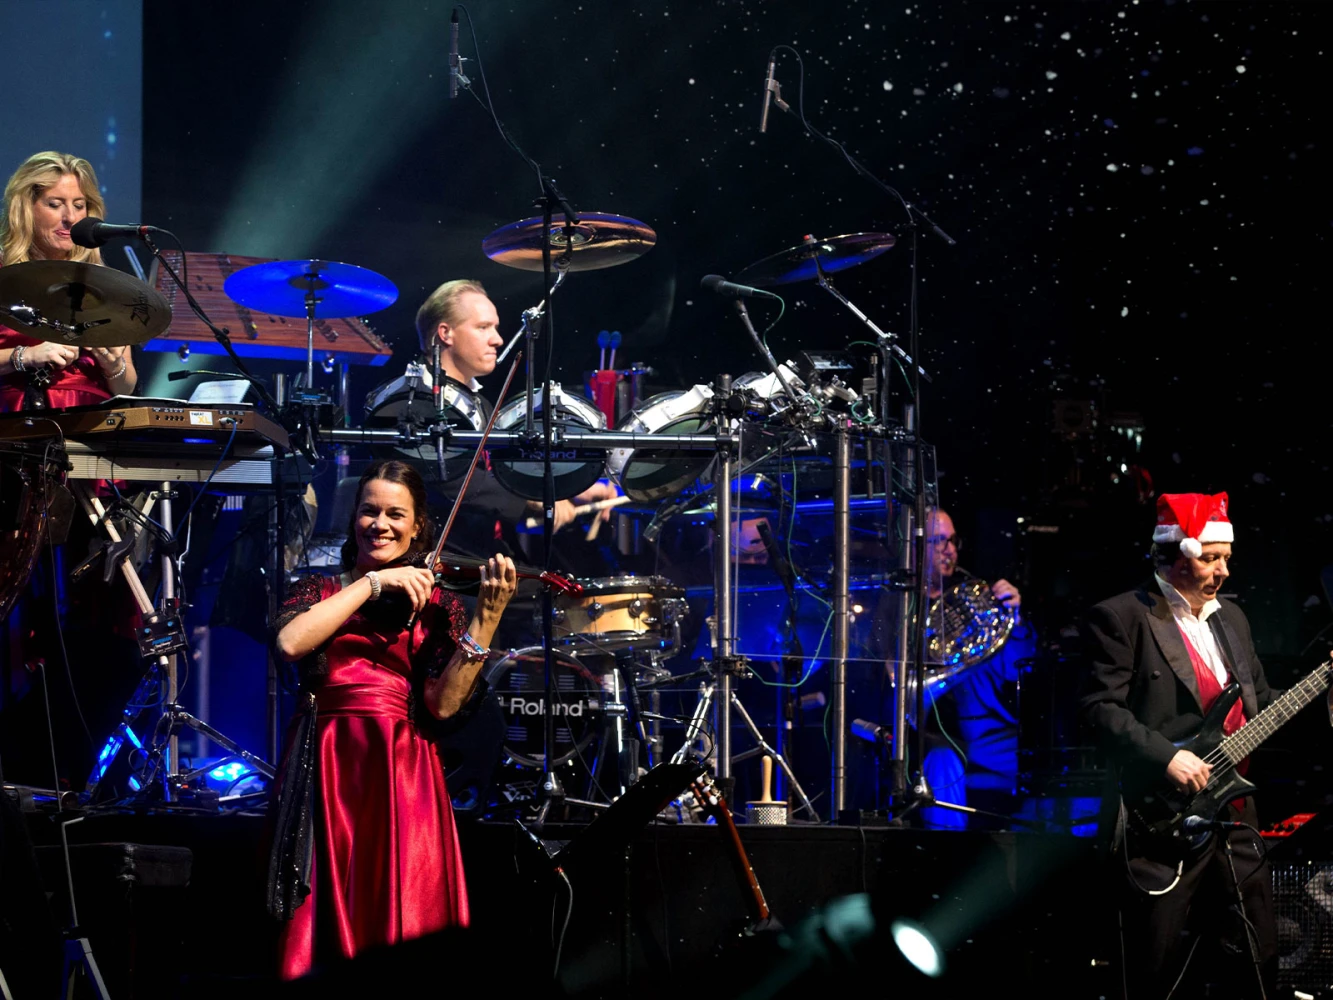 MANNHEIM STEAMROLLER CHRISTMAS BY CHIP DAVIS: What to expect - 3